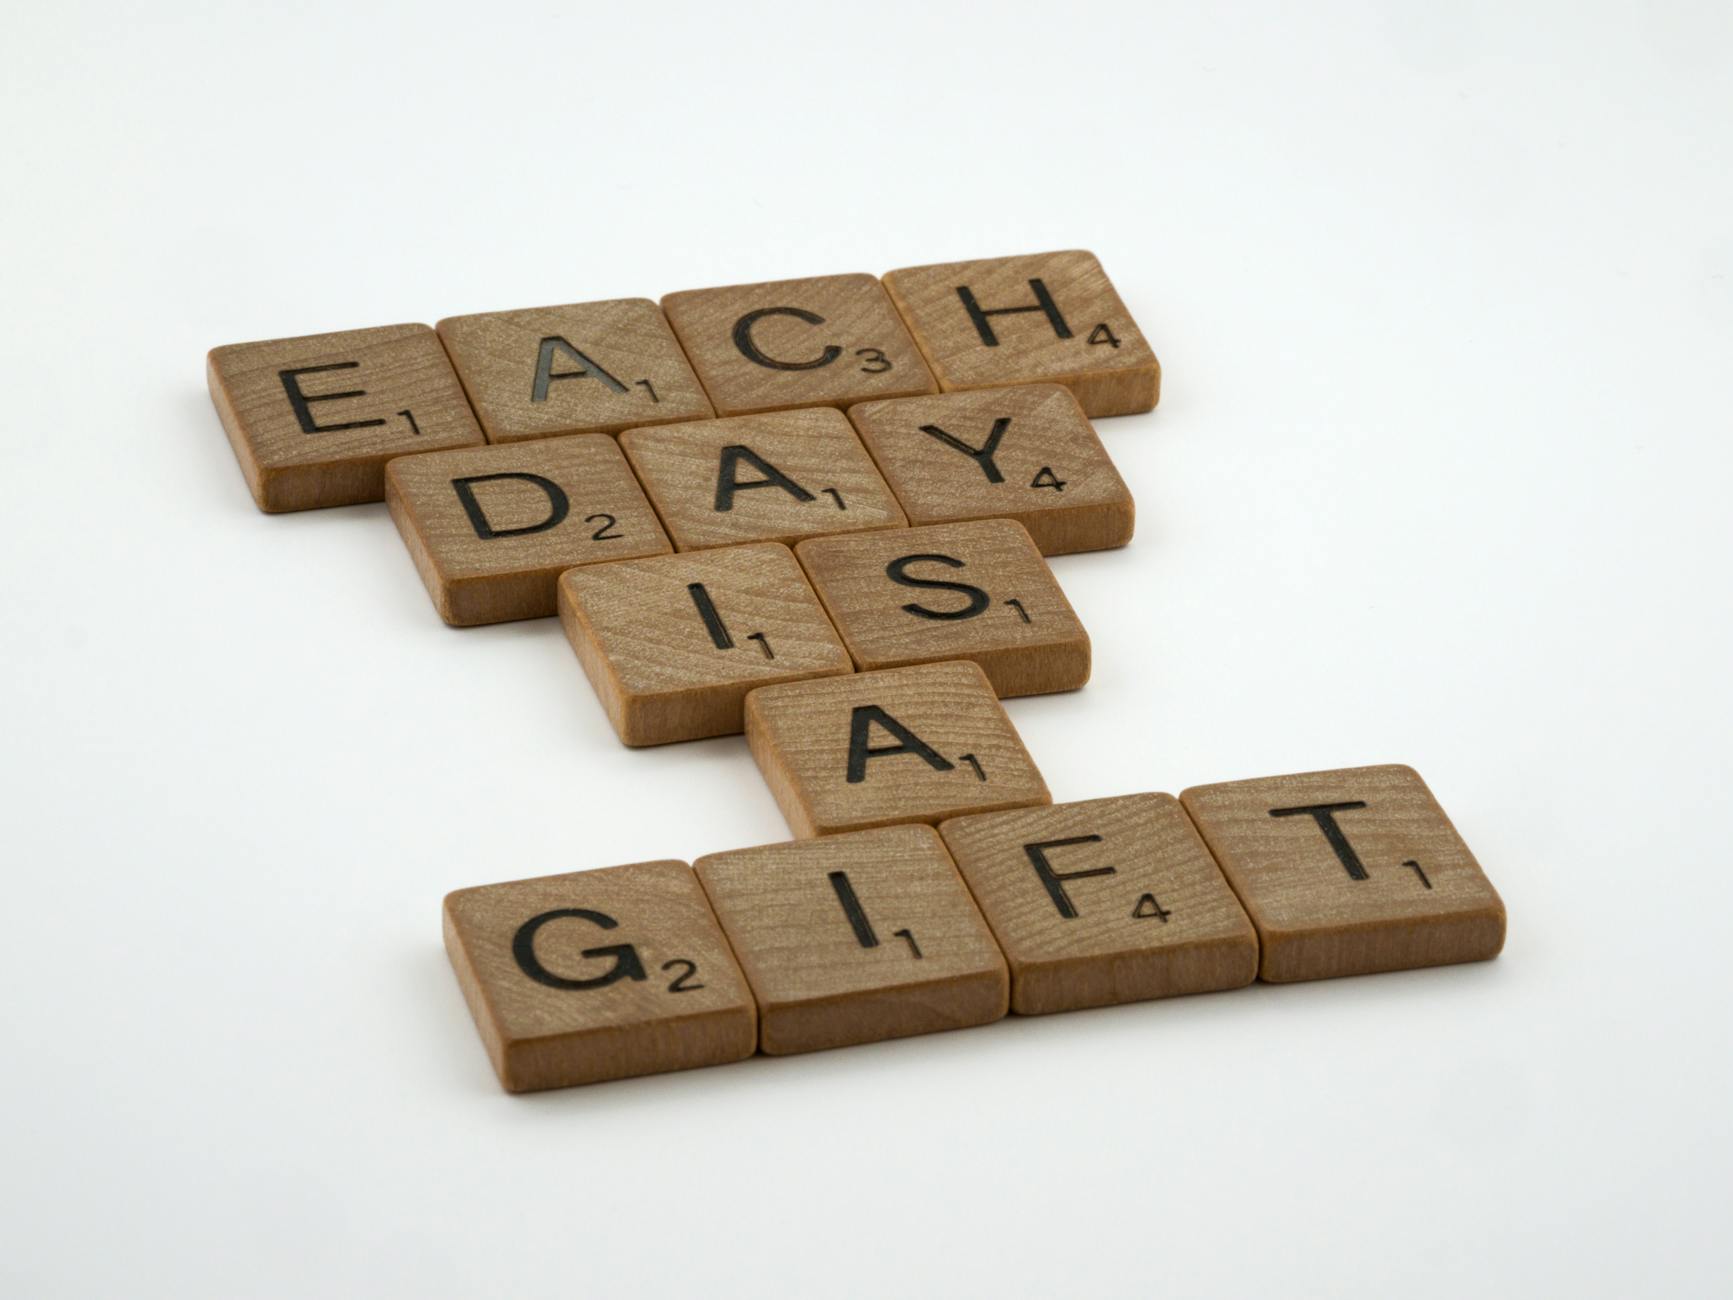 each day is a gift